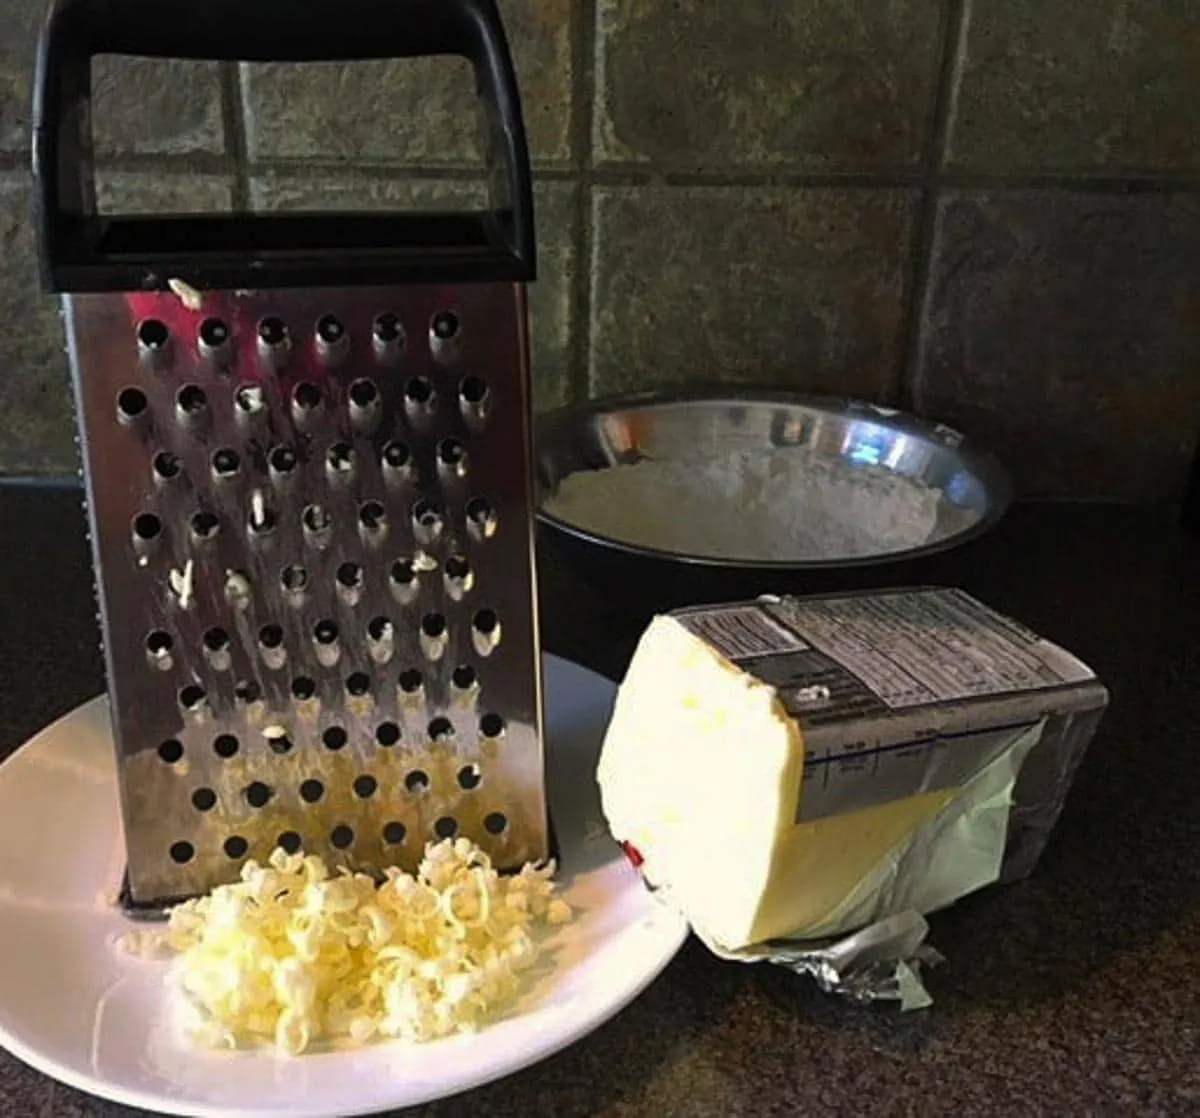 butter being cut (for pastry) with a cheese grater